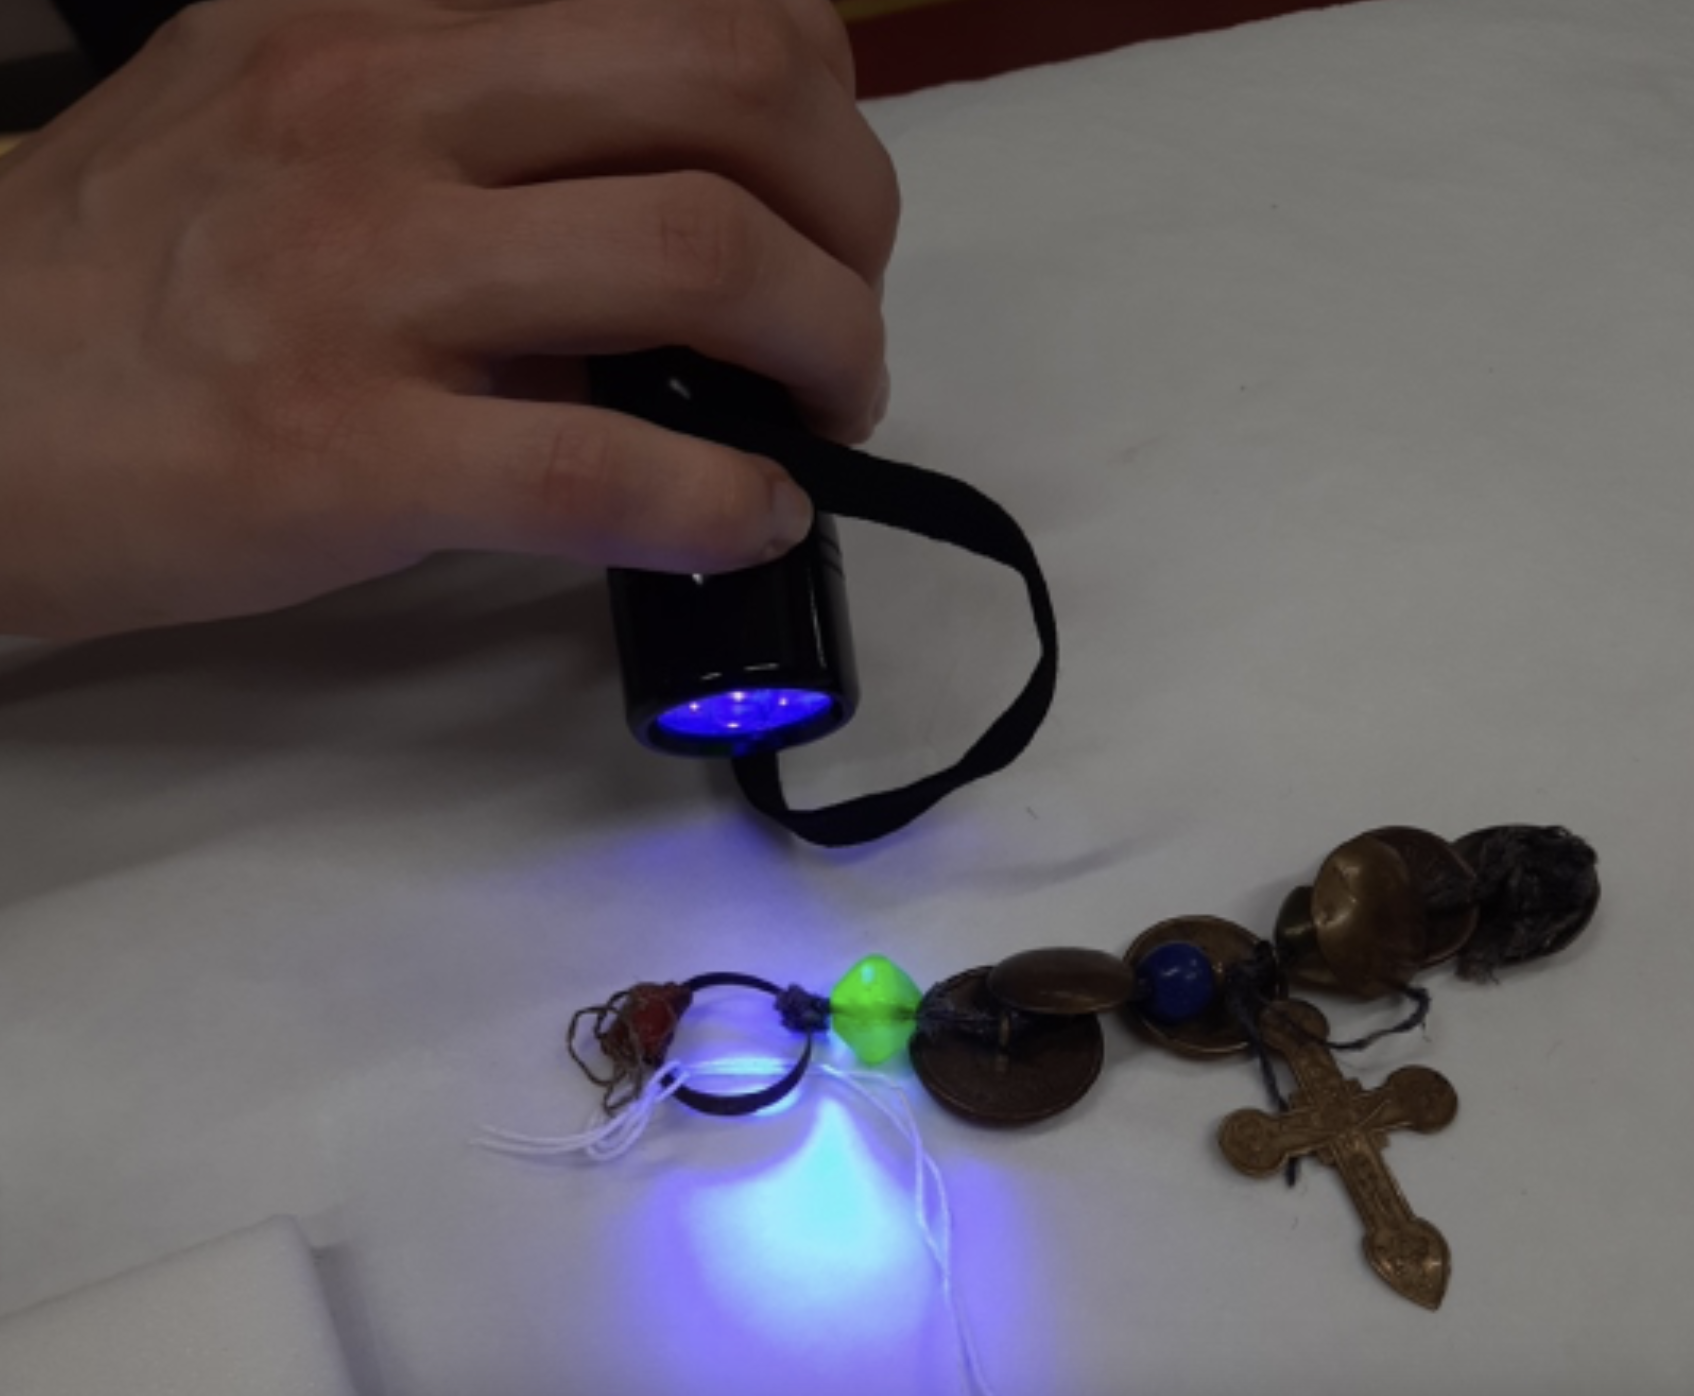 A hand holding a torch shines UV light onto a necklace revealing a bead which glows green.